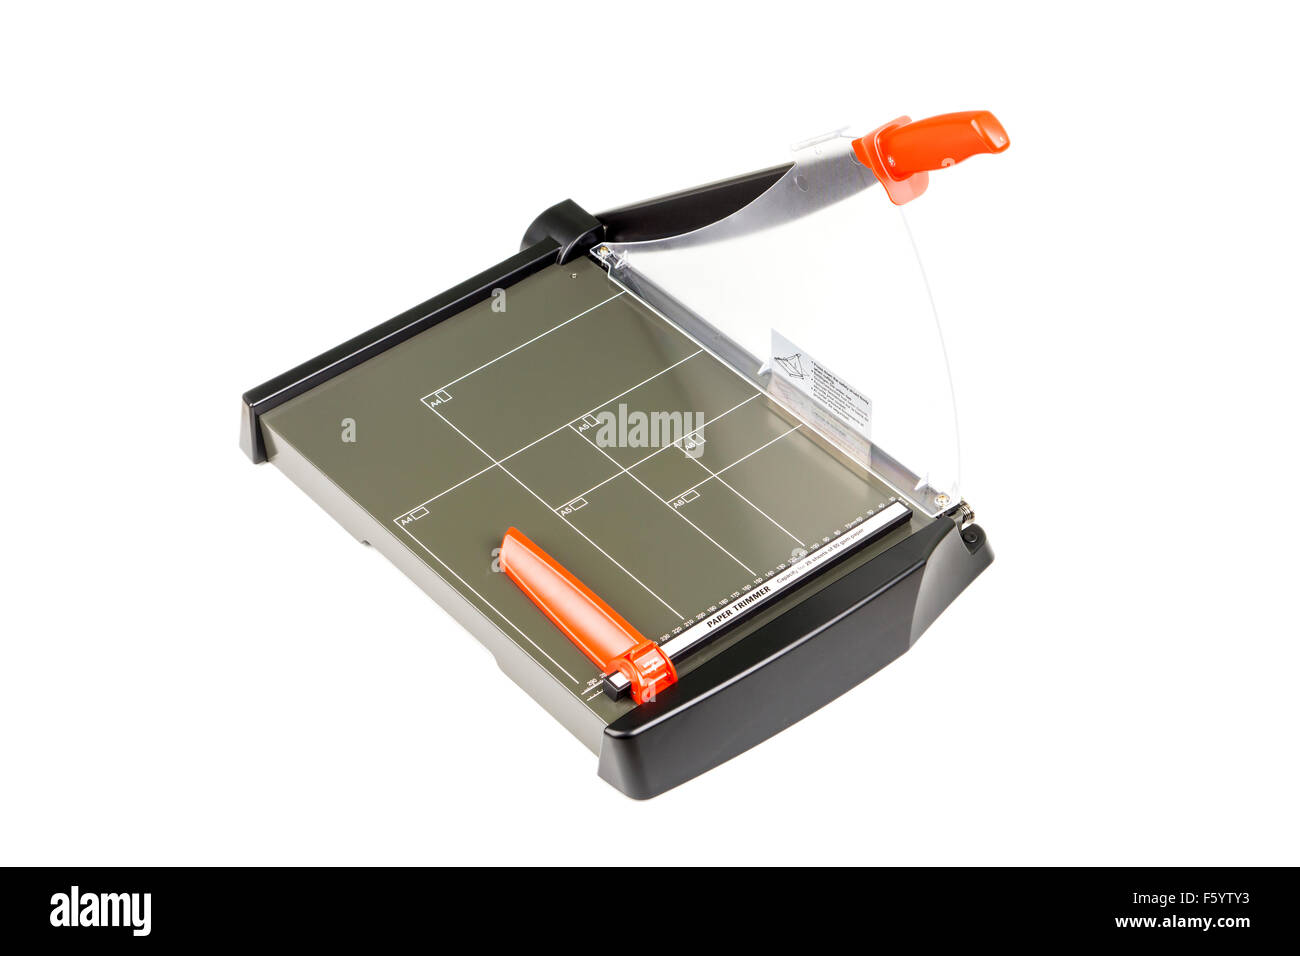 Paper trimmer with safety shield on white background. Stock Photo